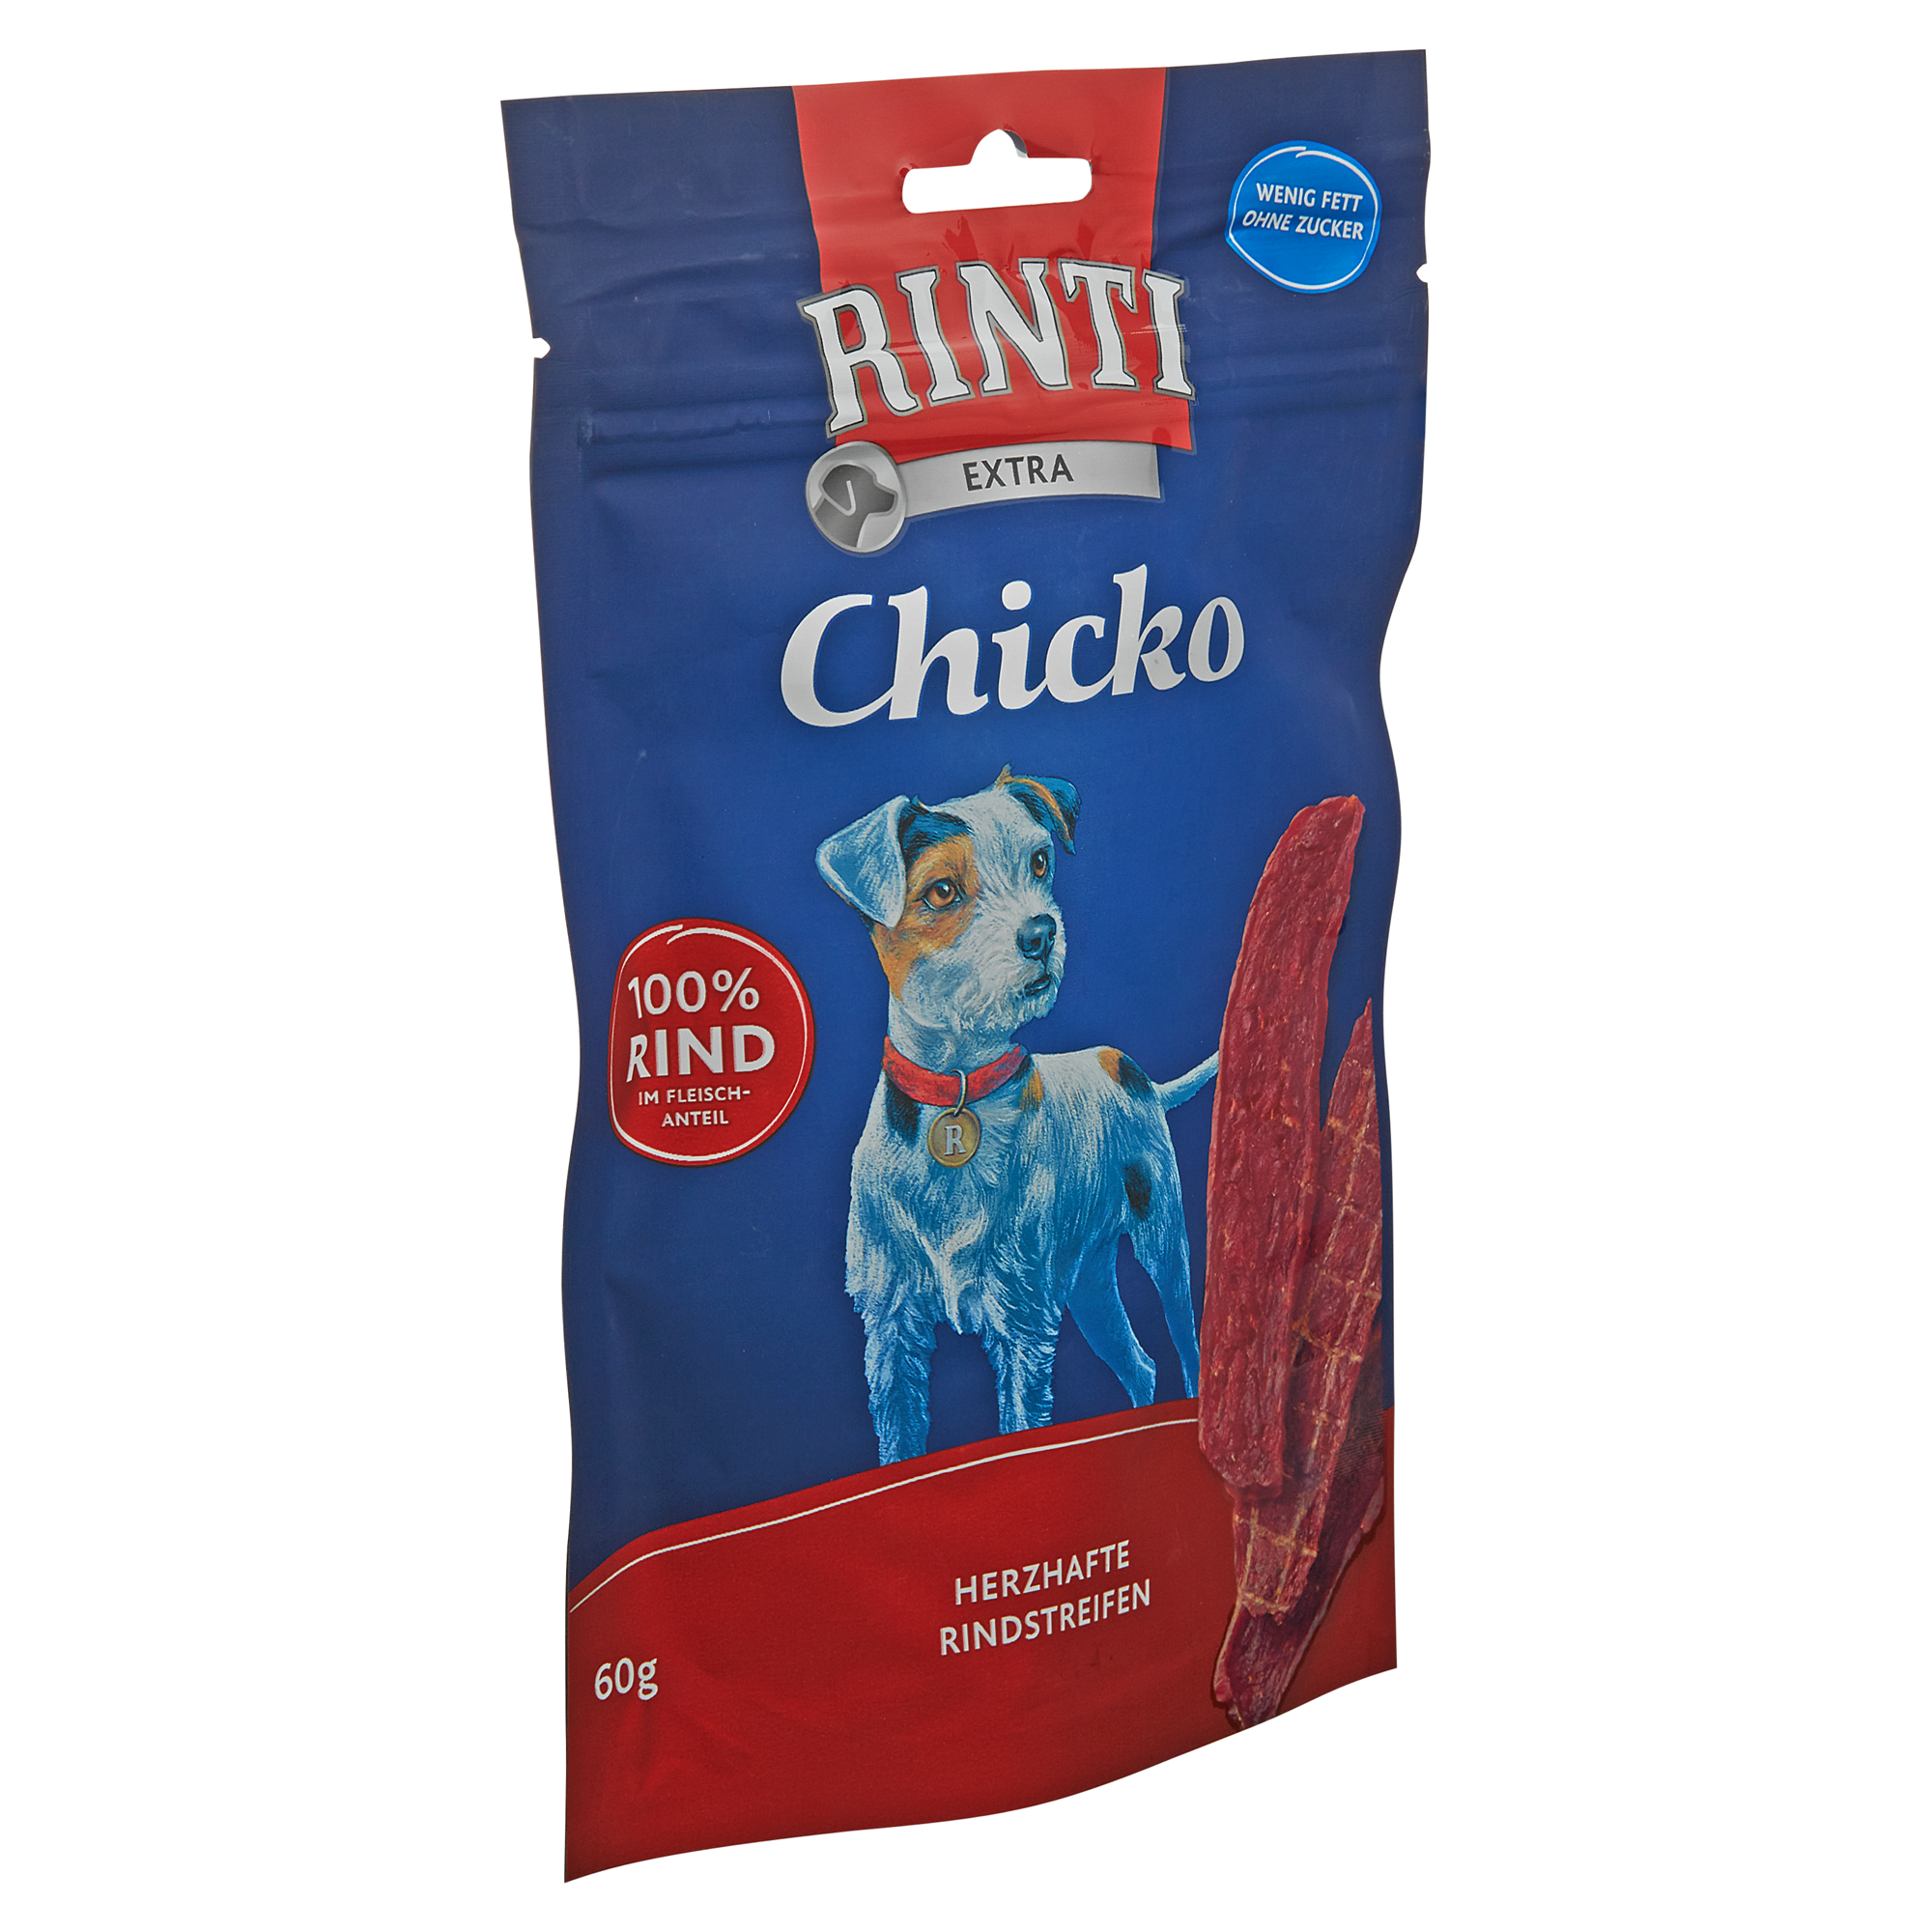 Hundesnack "Chicko" Extra mit Rindstreifen 60 g + product picture